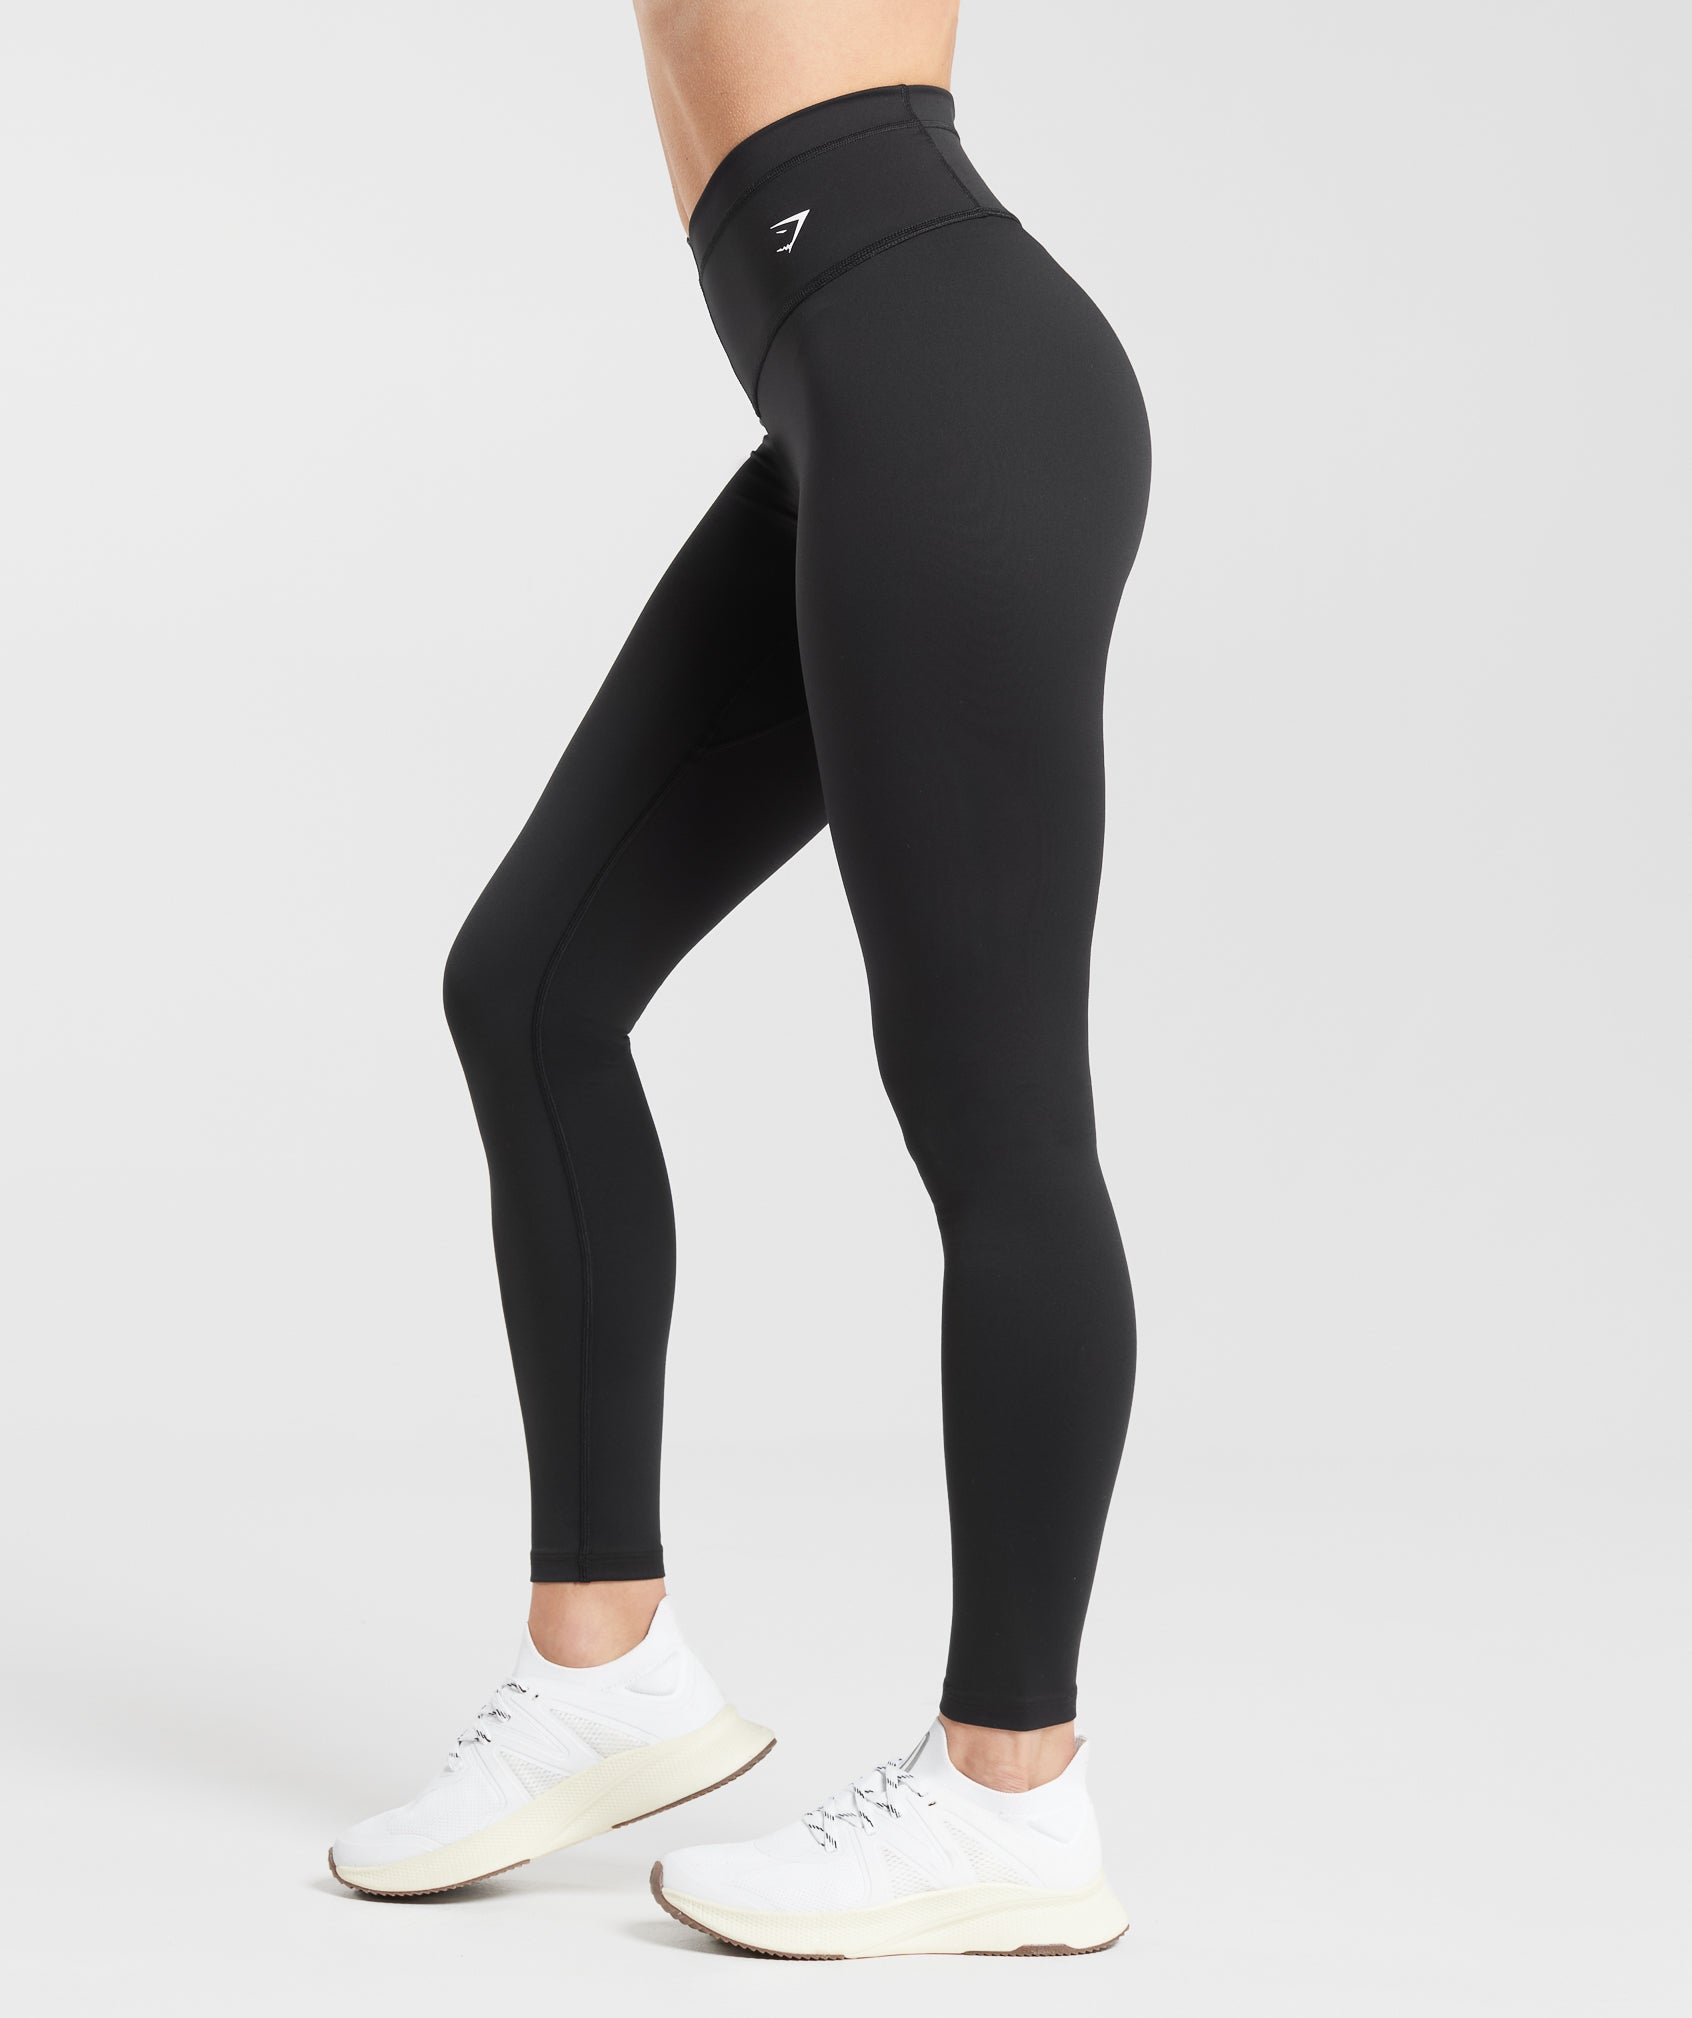 Skinnify ✨️NWT✨️ Resistance Band Leggings, XS Black, for extra calorie  burn! 🔥